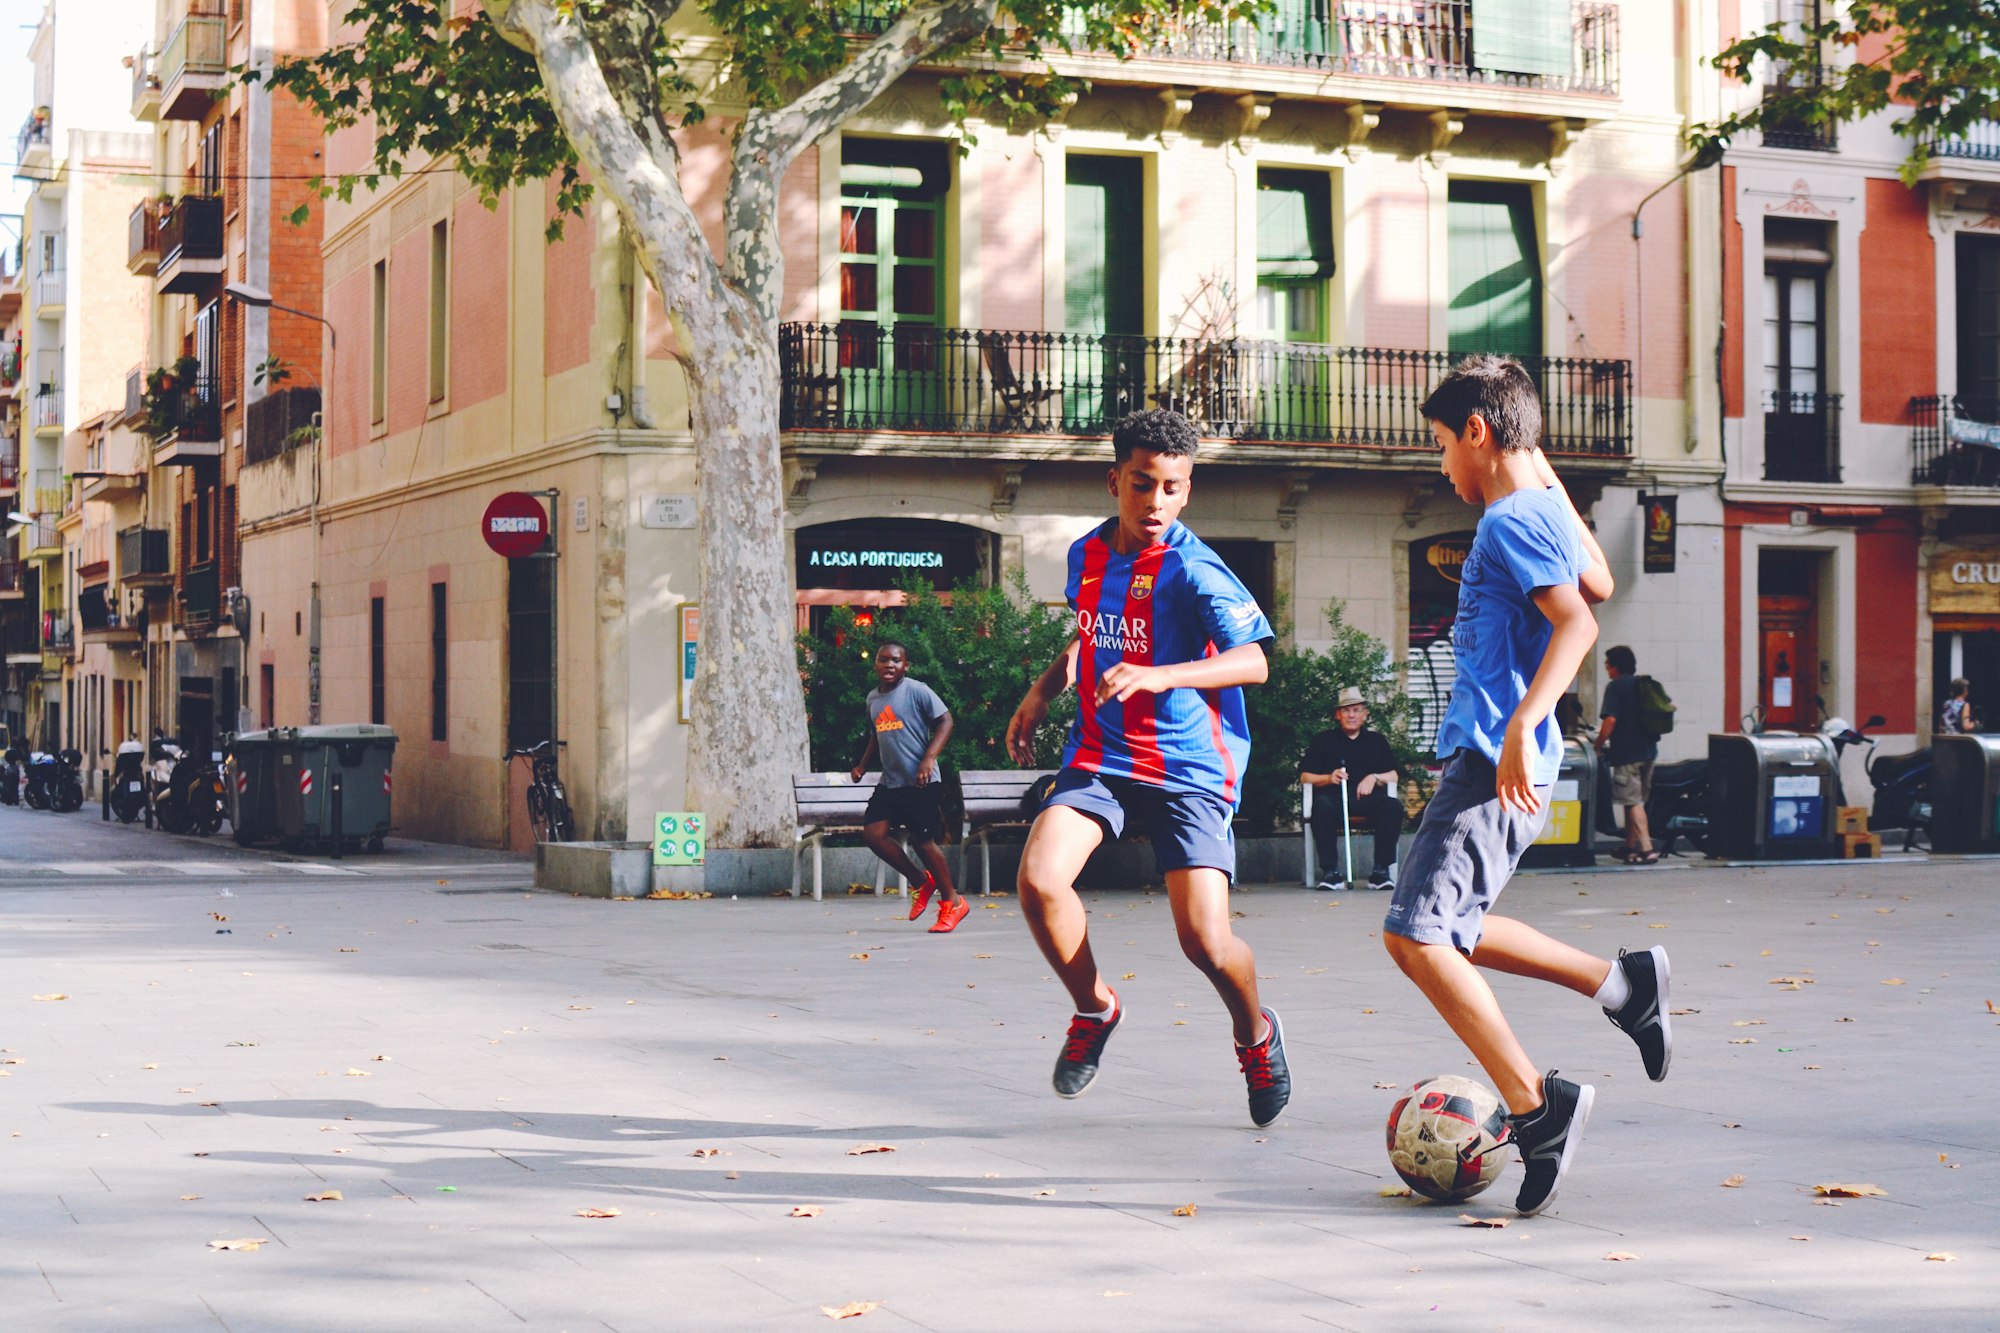 two boy's playing soccer near building during daytime